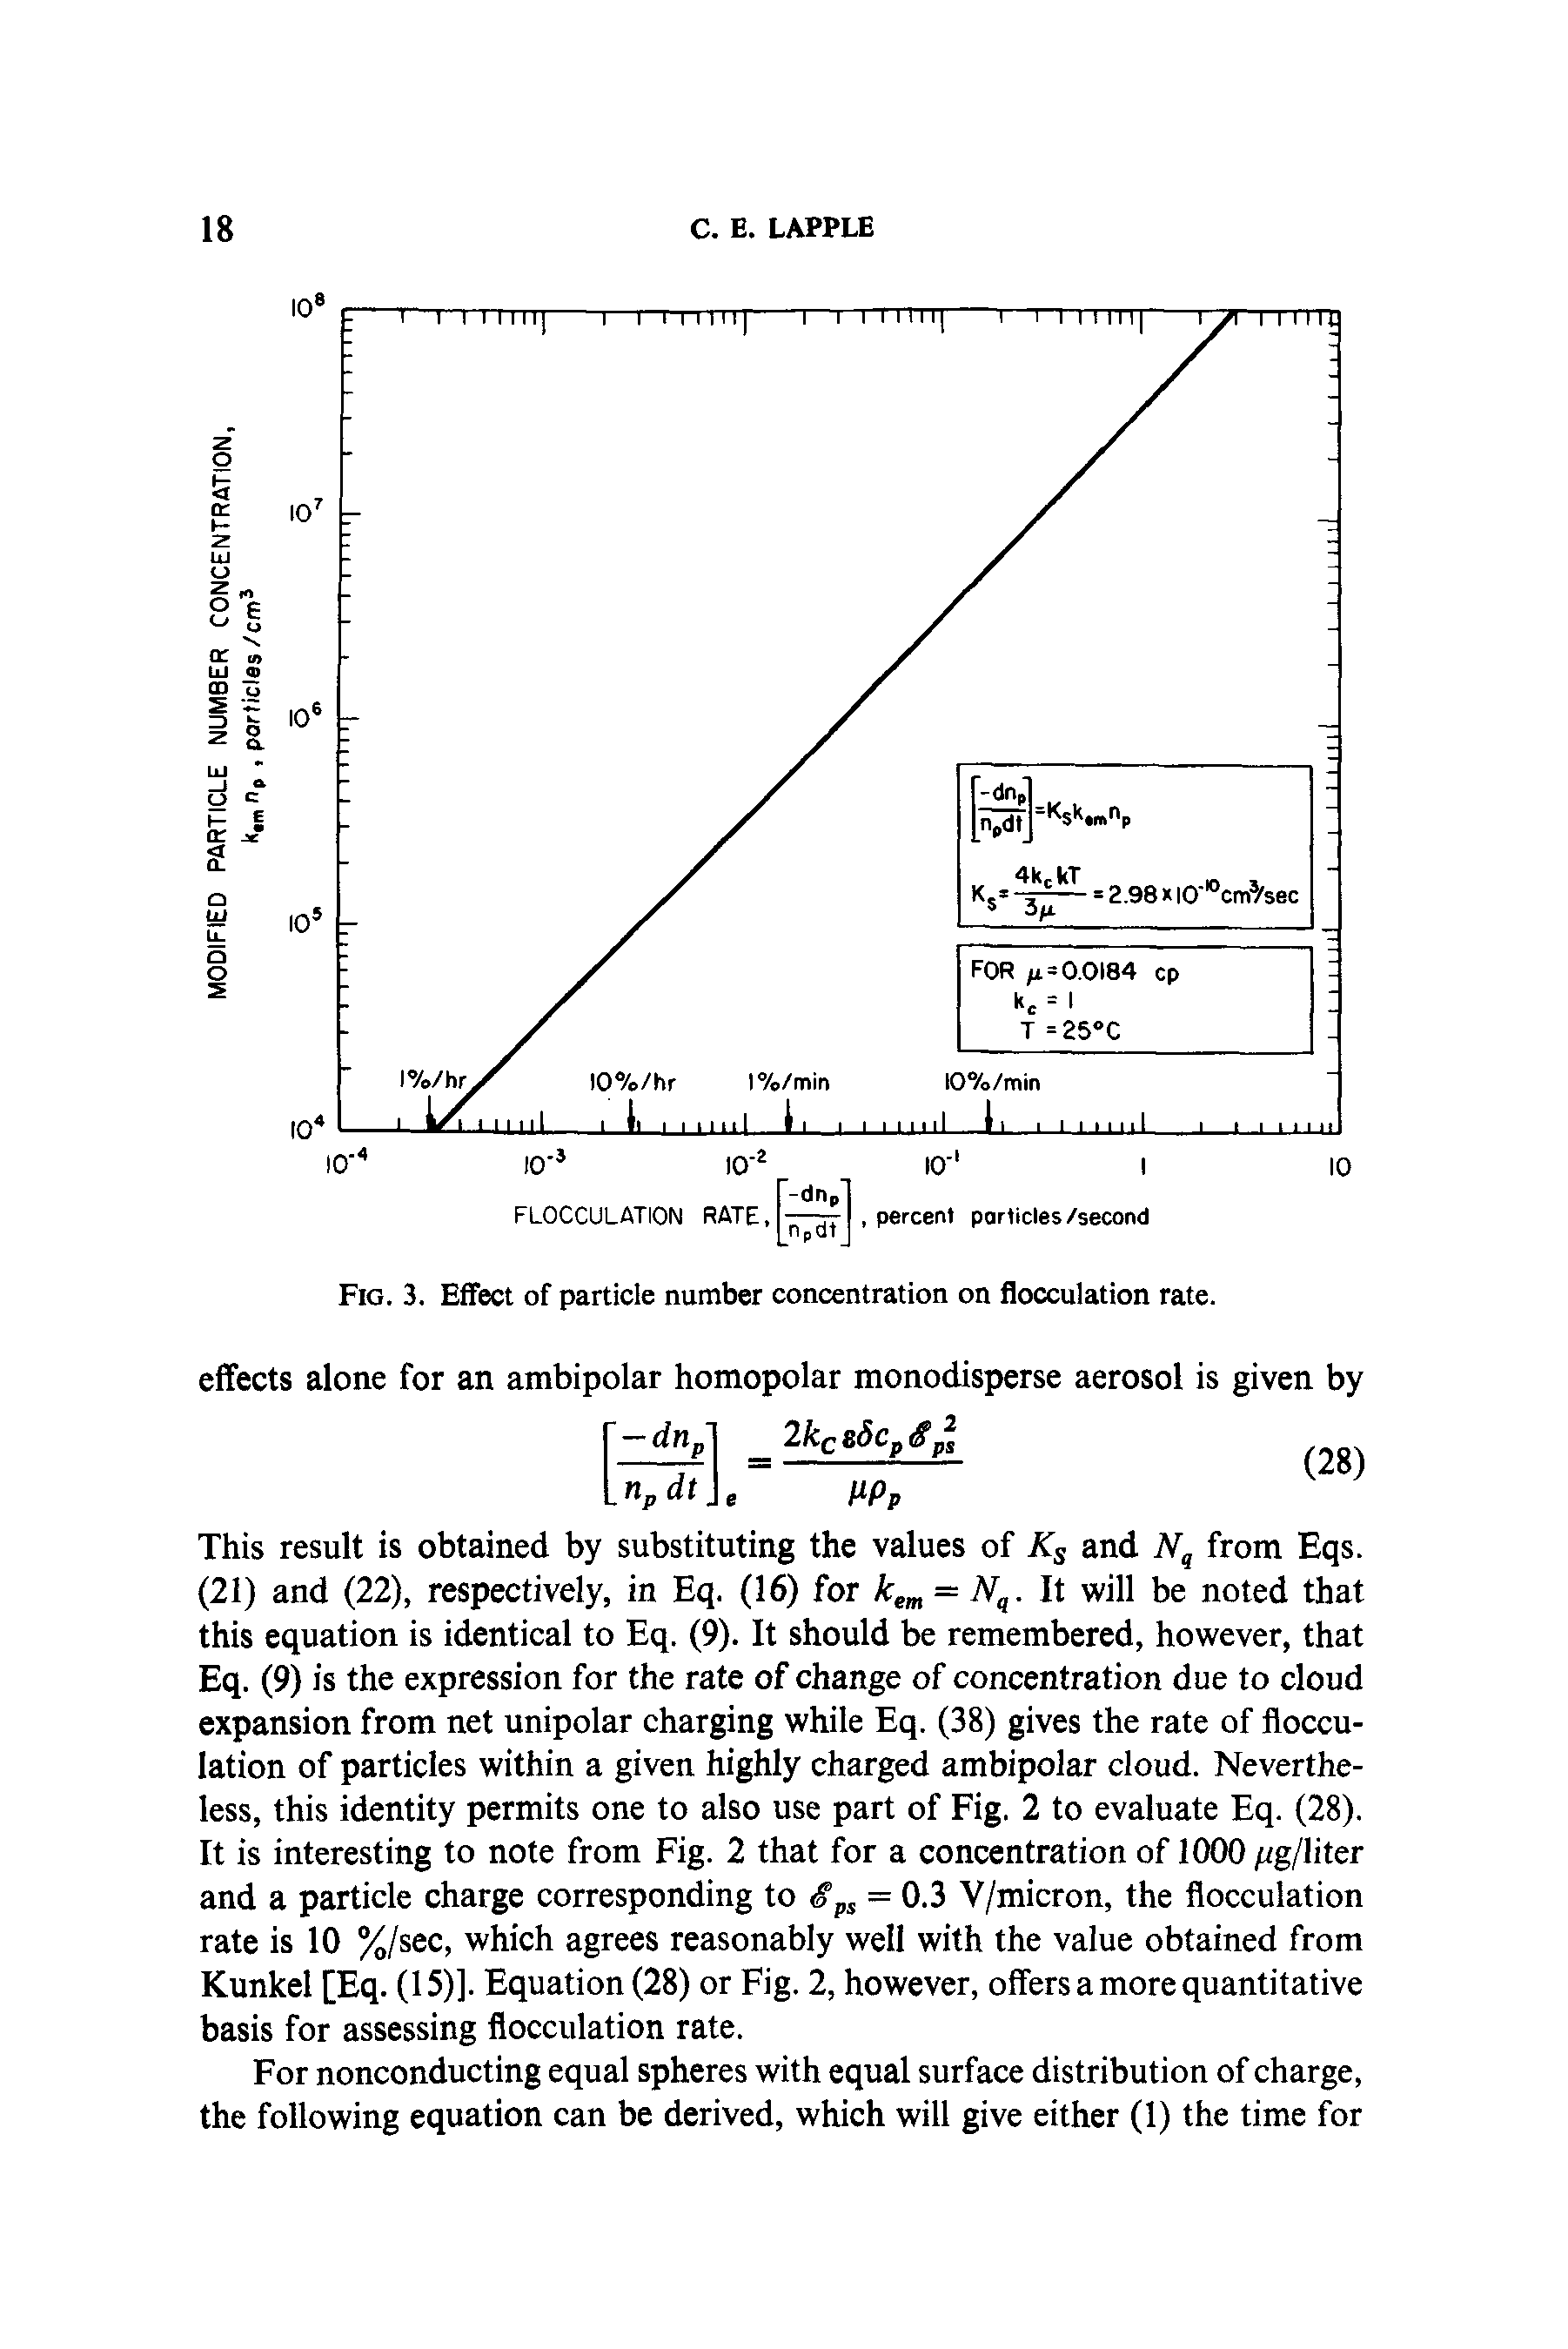 Fig. 3. Effect of particle number concentration on flocculation rate.